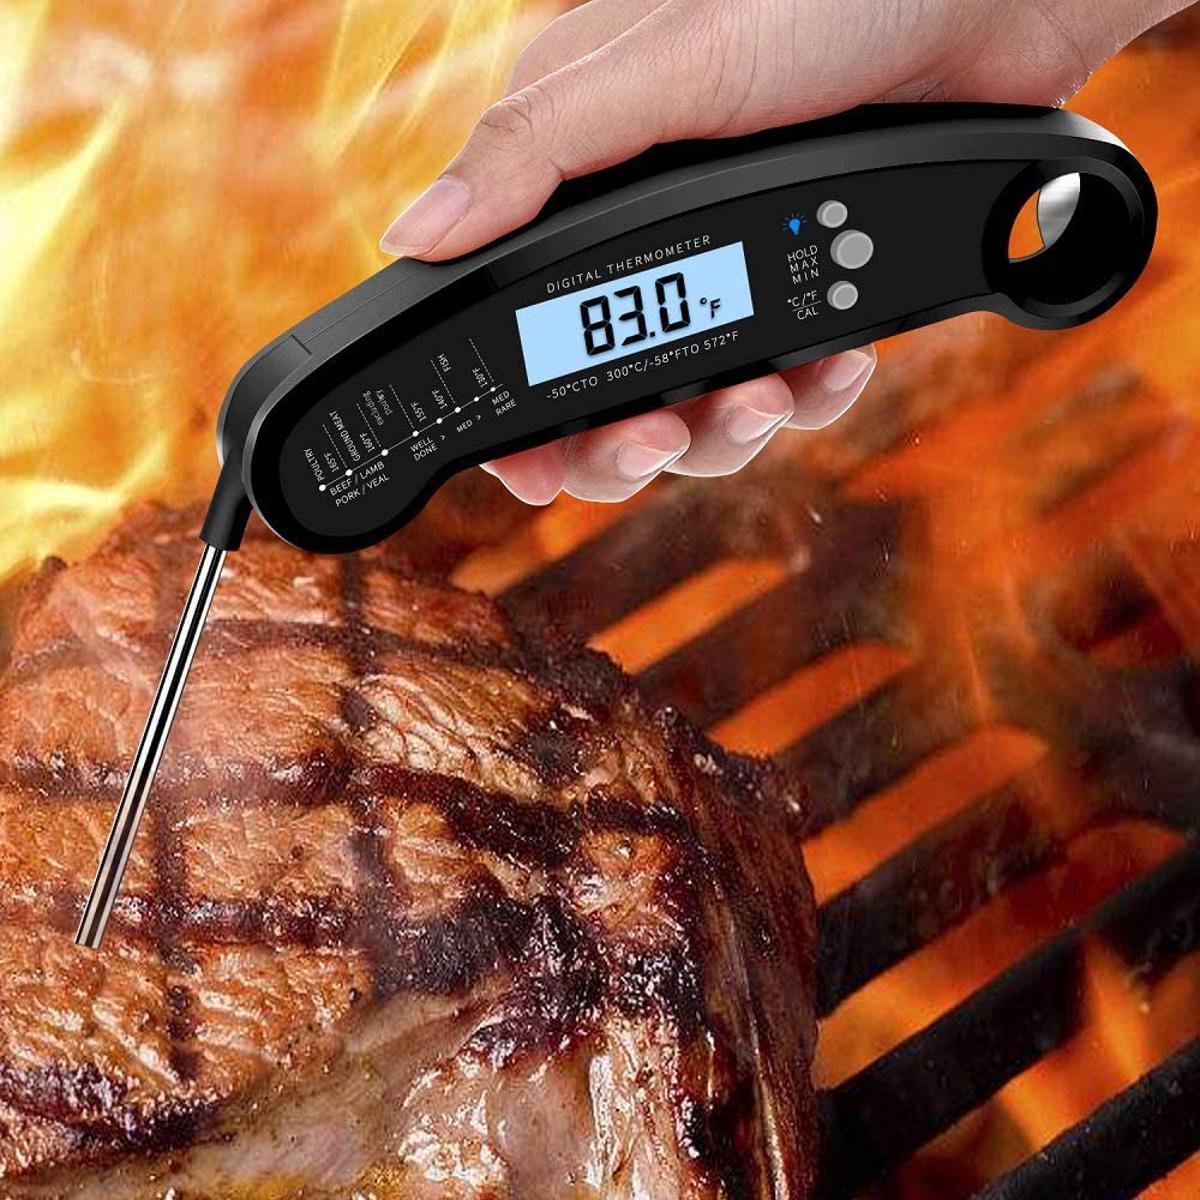  Digital Kitchen Thermometer for Bread, Candy, Yogurt, Liquids,  Baking, BBQ Meat - Instant Read, Waterproof Magnetic Body and Wireless  Large Probe with a Bottle Opener and Backlit Dial: Home & Kitchen